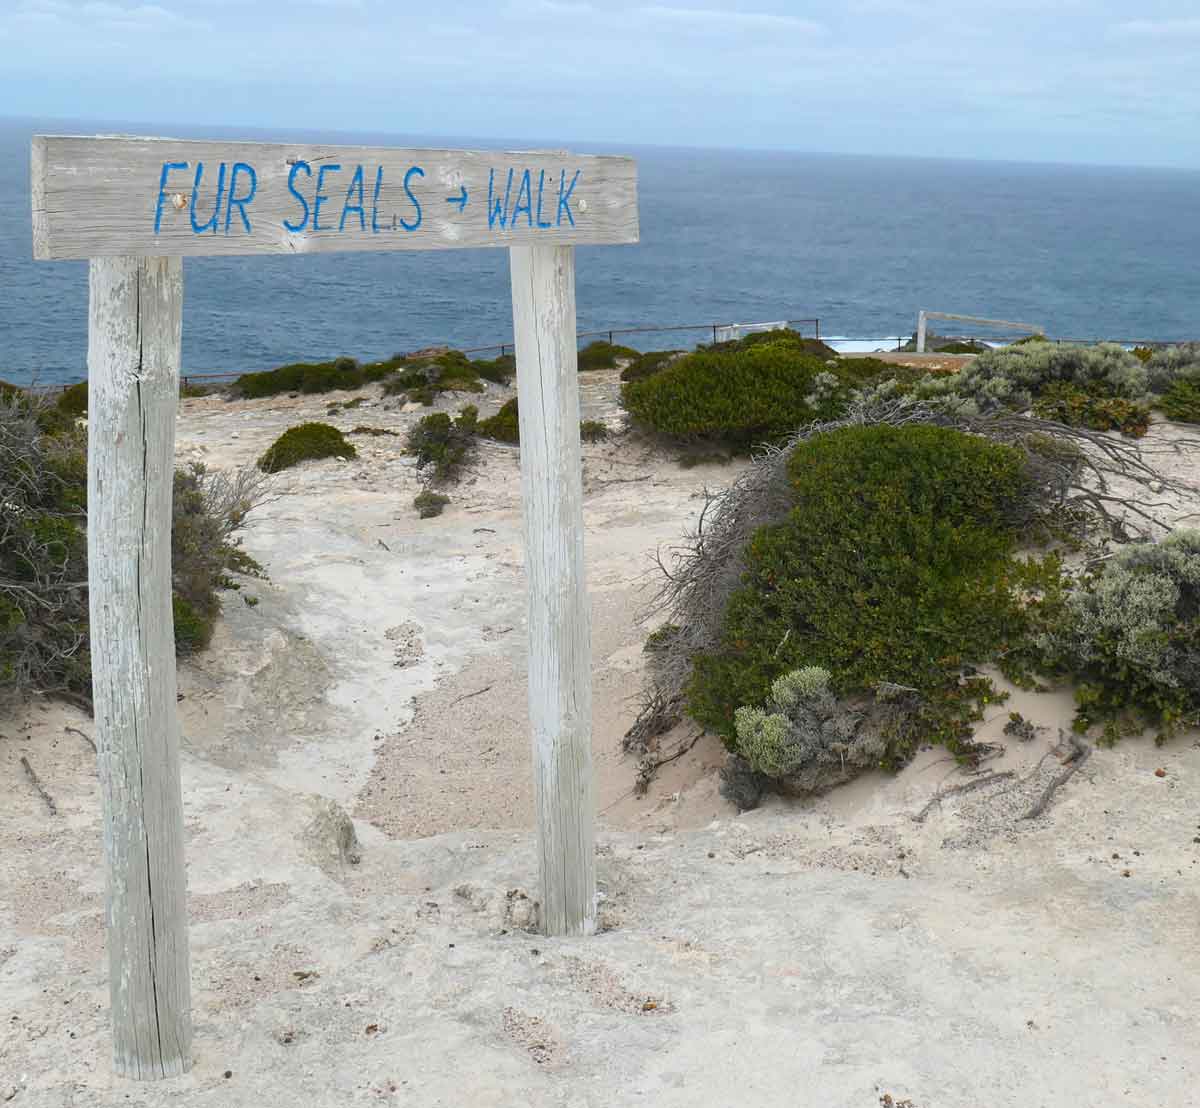 Sign for "fur seals" at Cape Wiles. Located in Whaler's Way Sanctuary, Eyre Peninsula, South Australia.